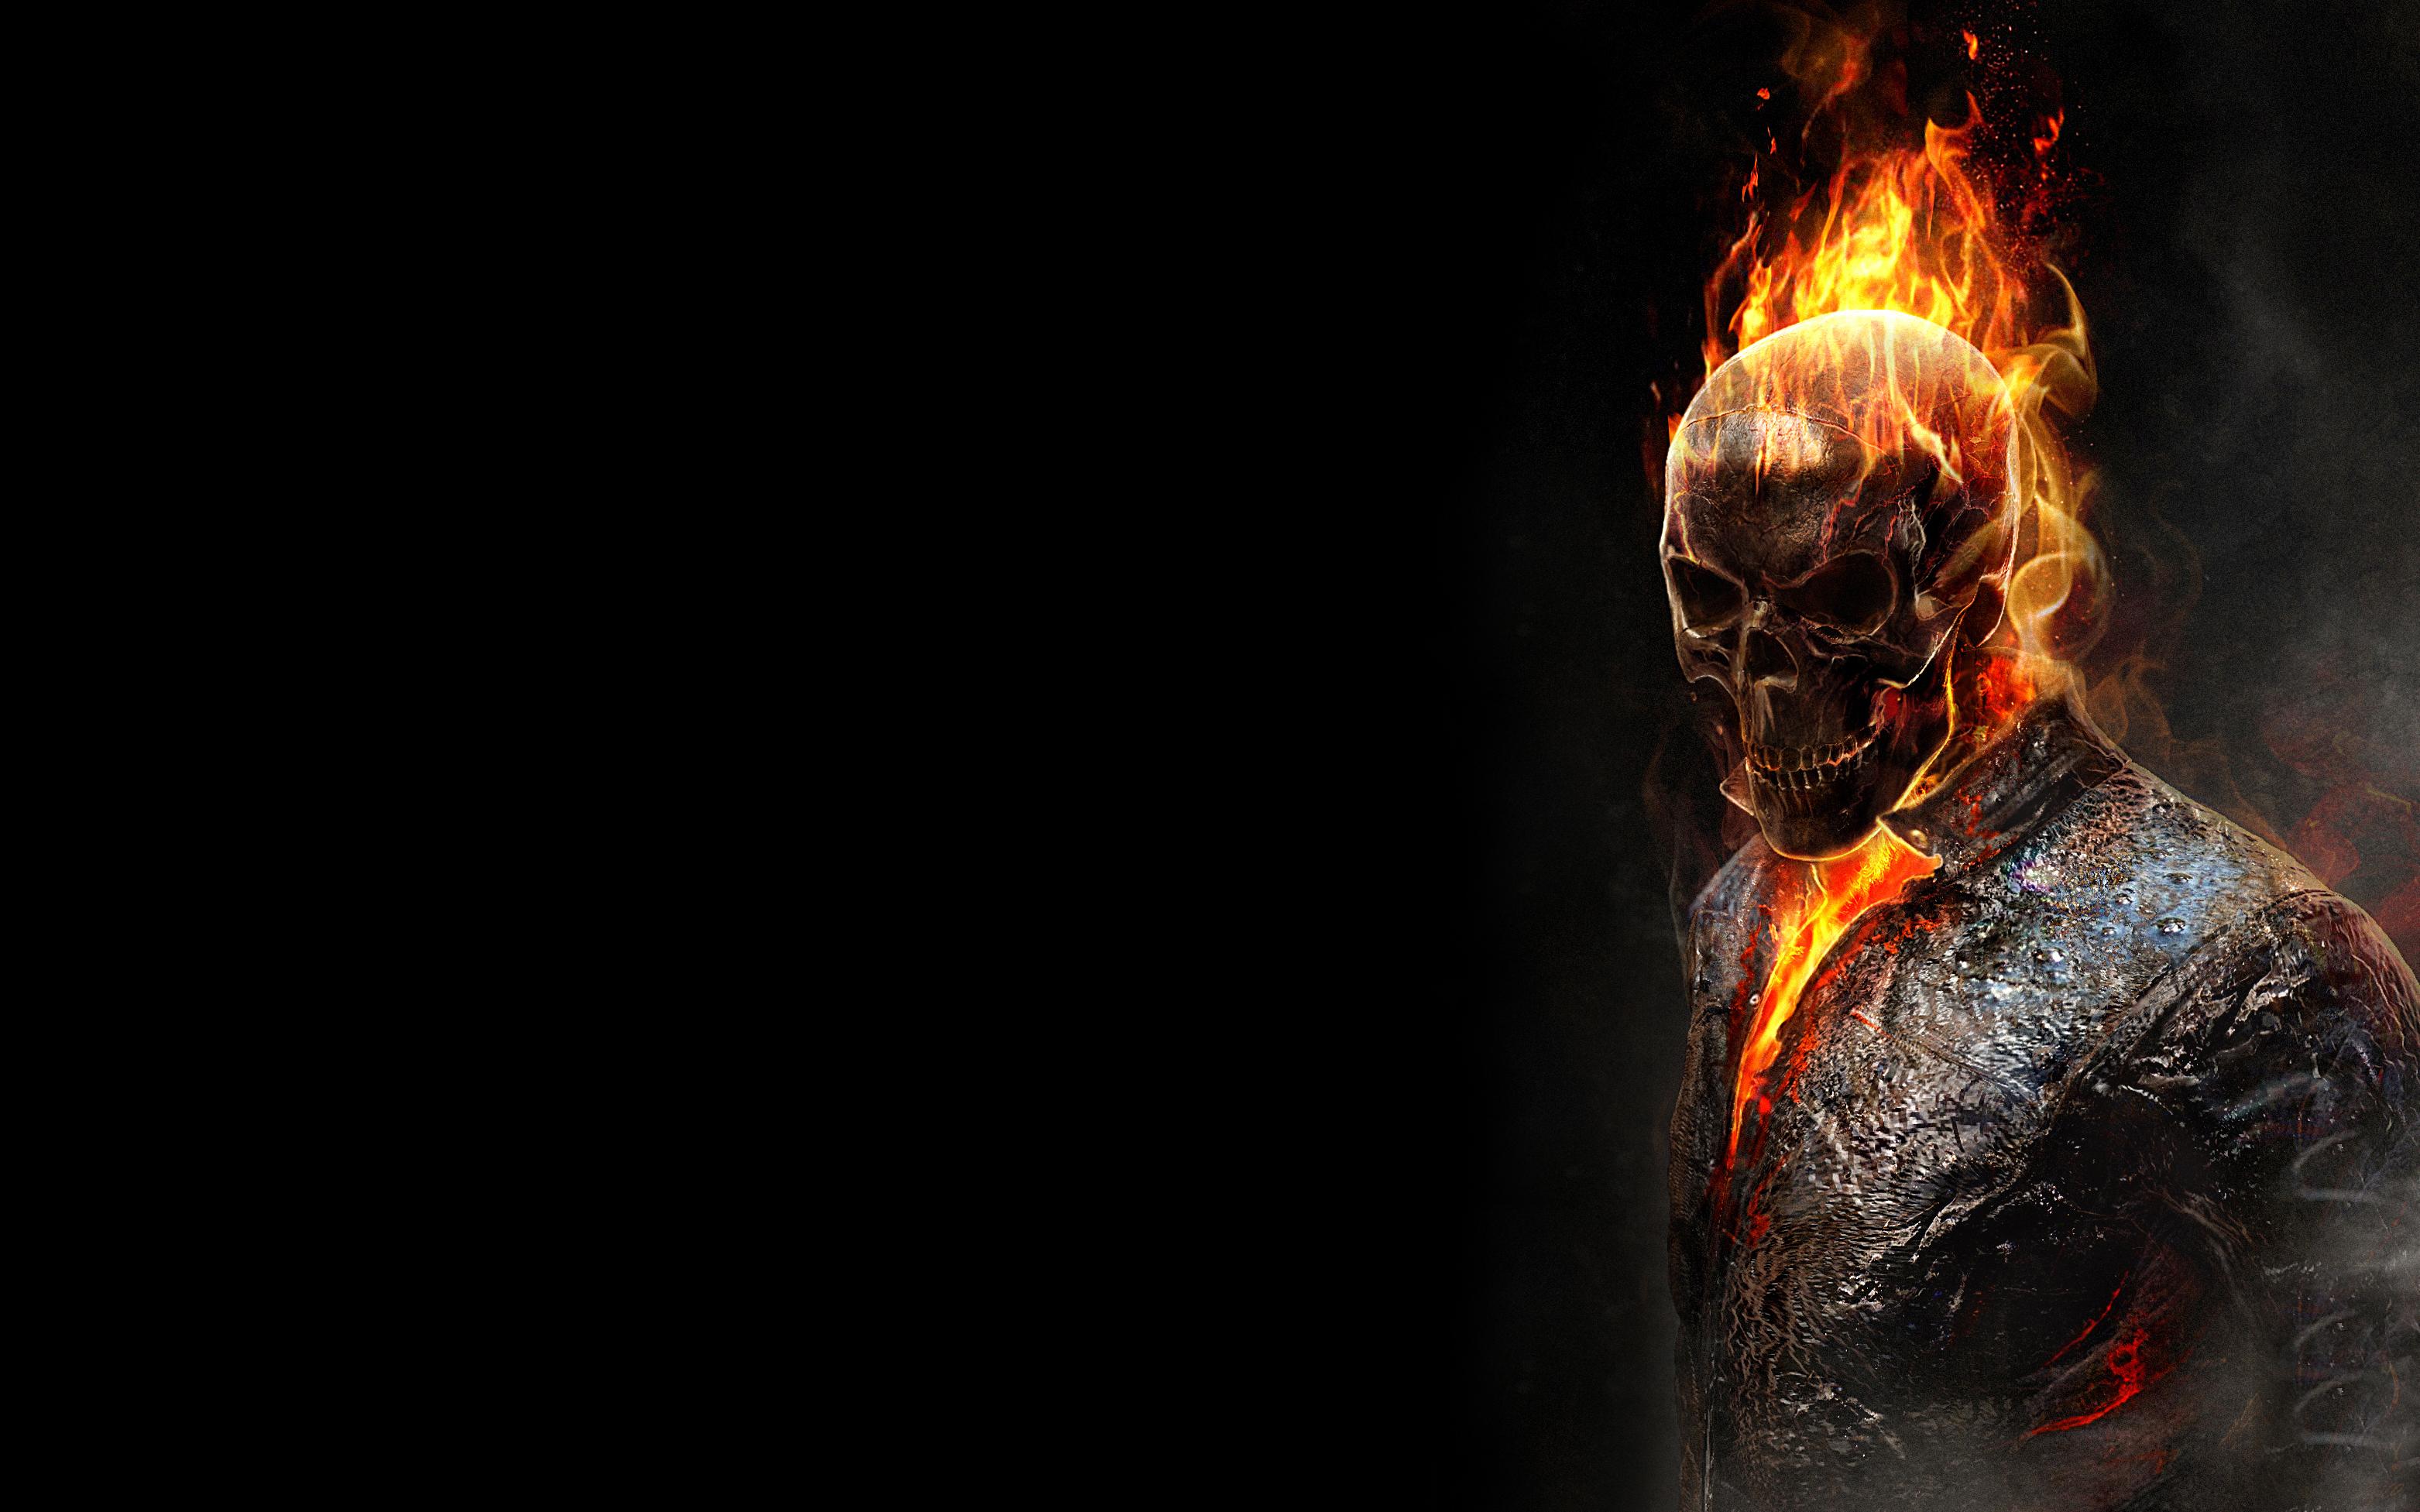 3125 x 1953 · jpeg - Burning Ghost Rider, HD Superheroes, 4k Wallpapers, Images, Backgrounds ...